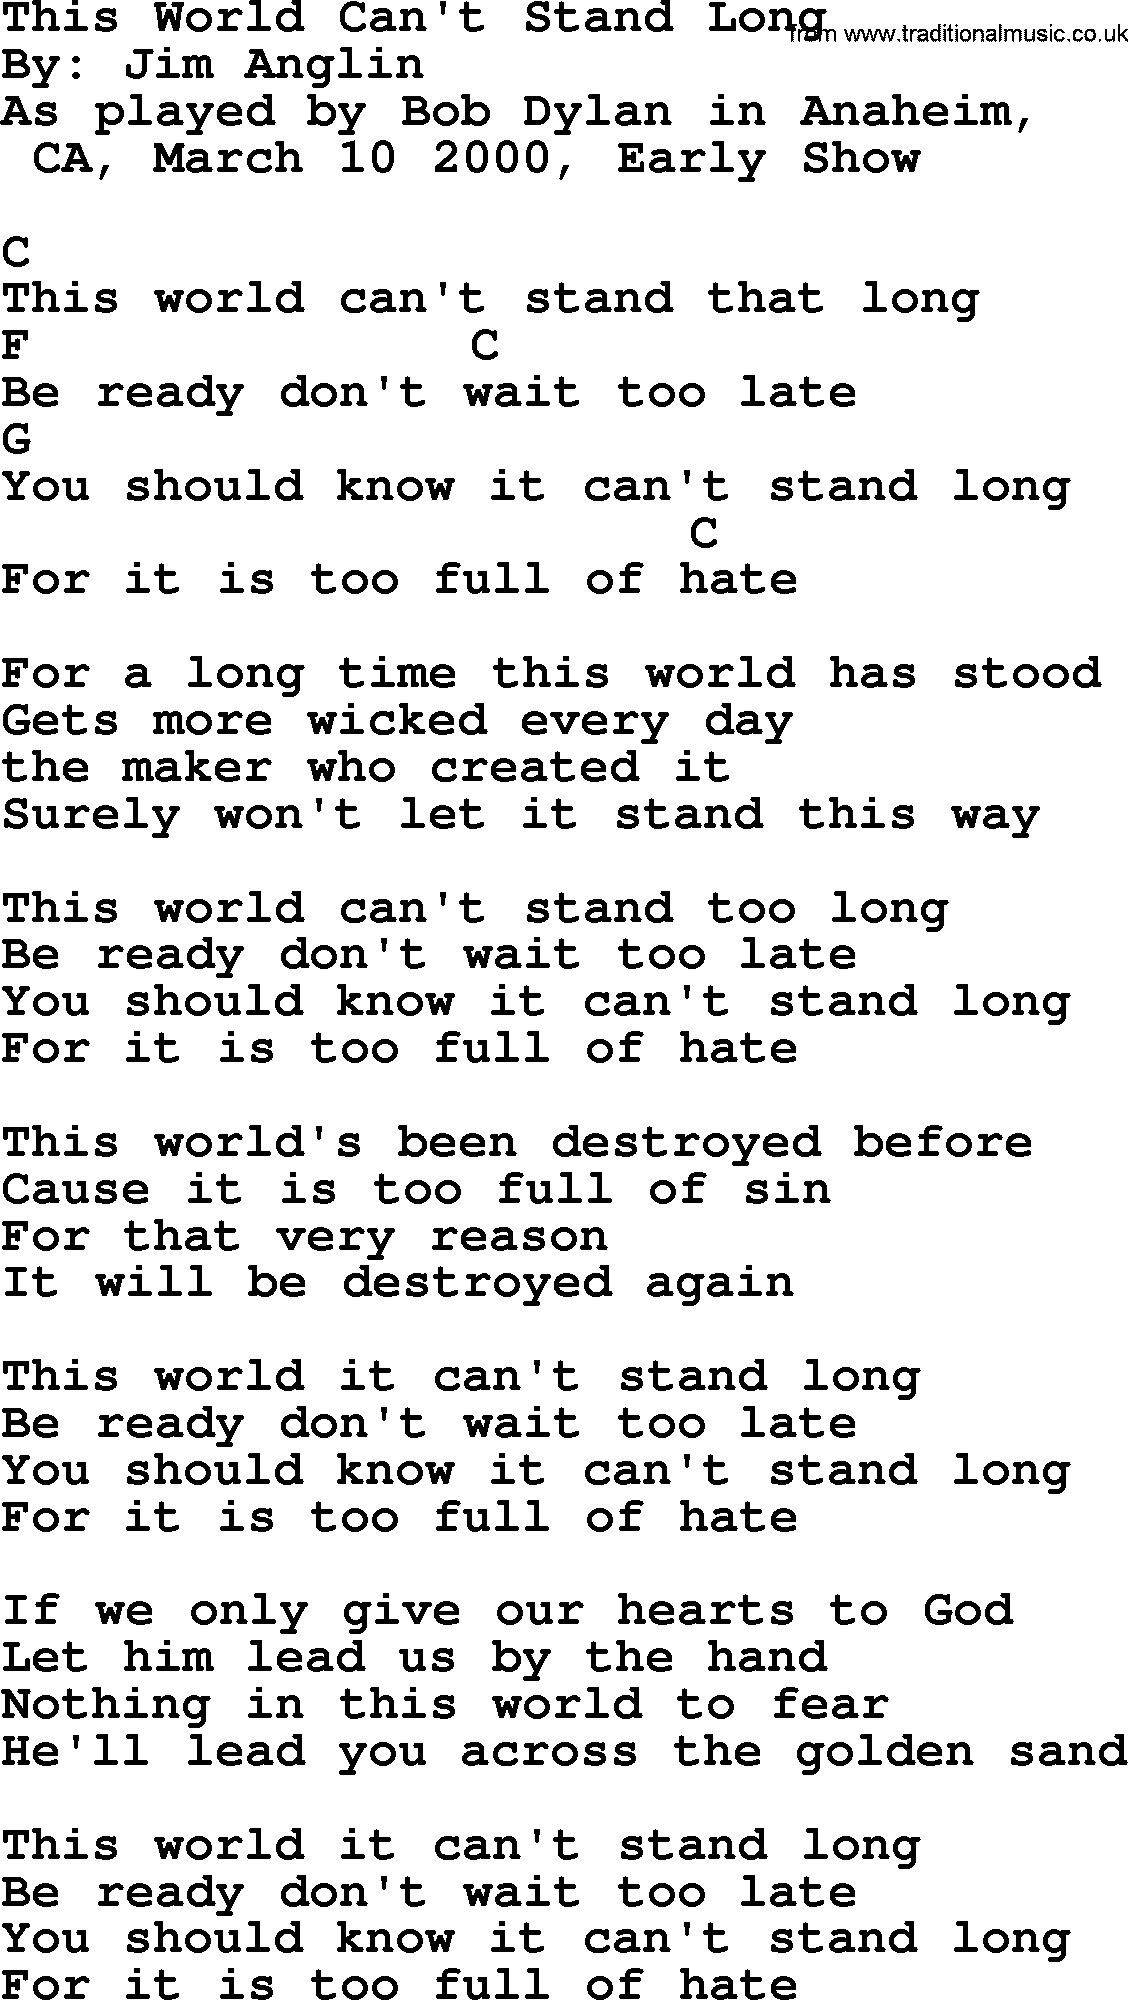 Bob Dylan song, lyrics with chords - This World Can't Stand Long